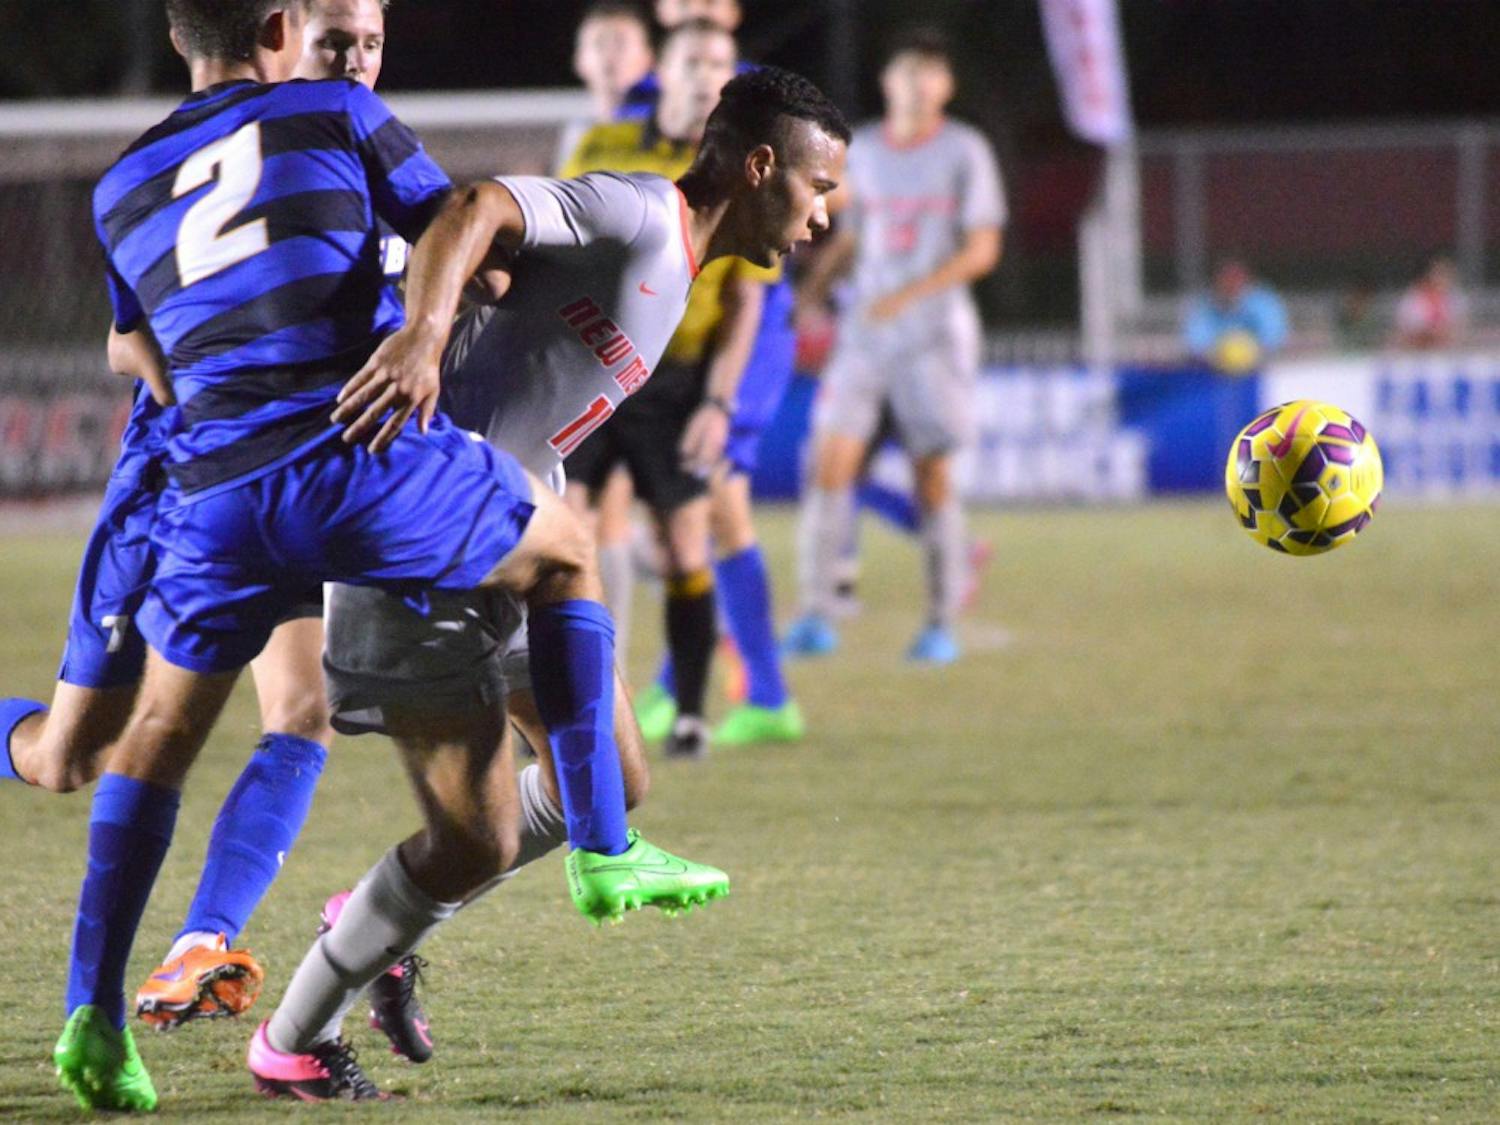 Niko Hansen charges past two San Diego players during their game on Sept. 4. The Lobos will play Missouri State this Friday at 7 p.m.